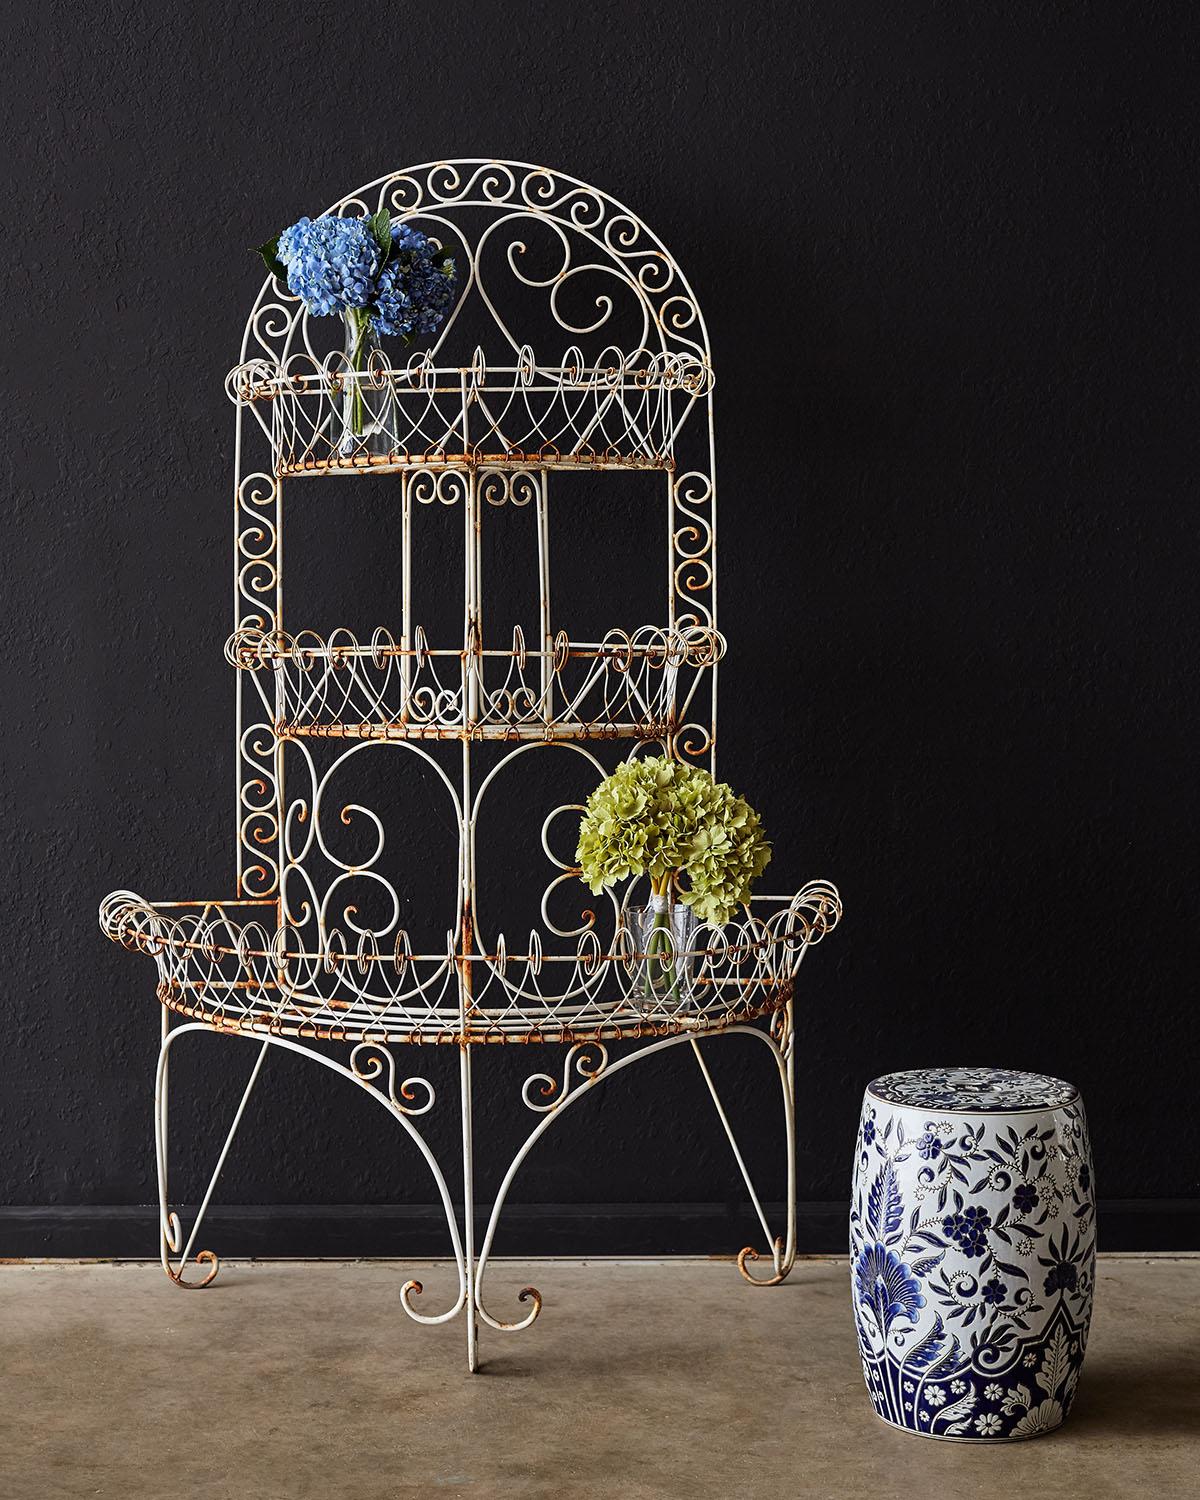 Grand French three-tier iron and wire plant stand having a demilune form. The three tier iron frame is decorated with wire bent in a graceful scrolled border on each shelf. Supported by three sets of legs ending with scrolled feet. Excellent joinery